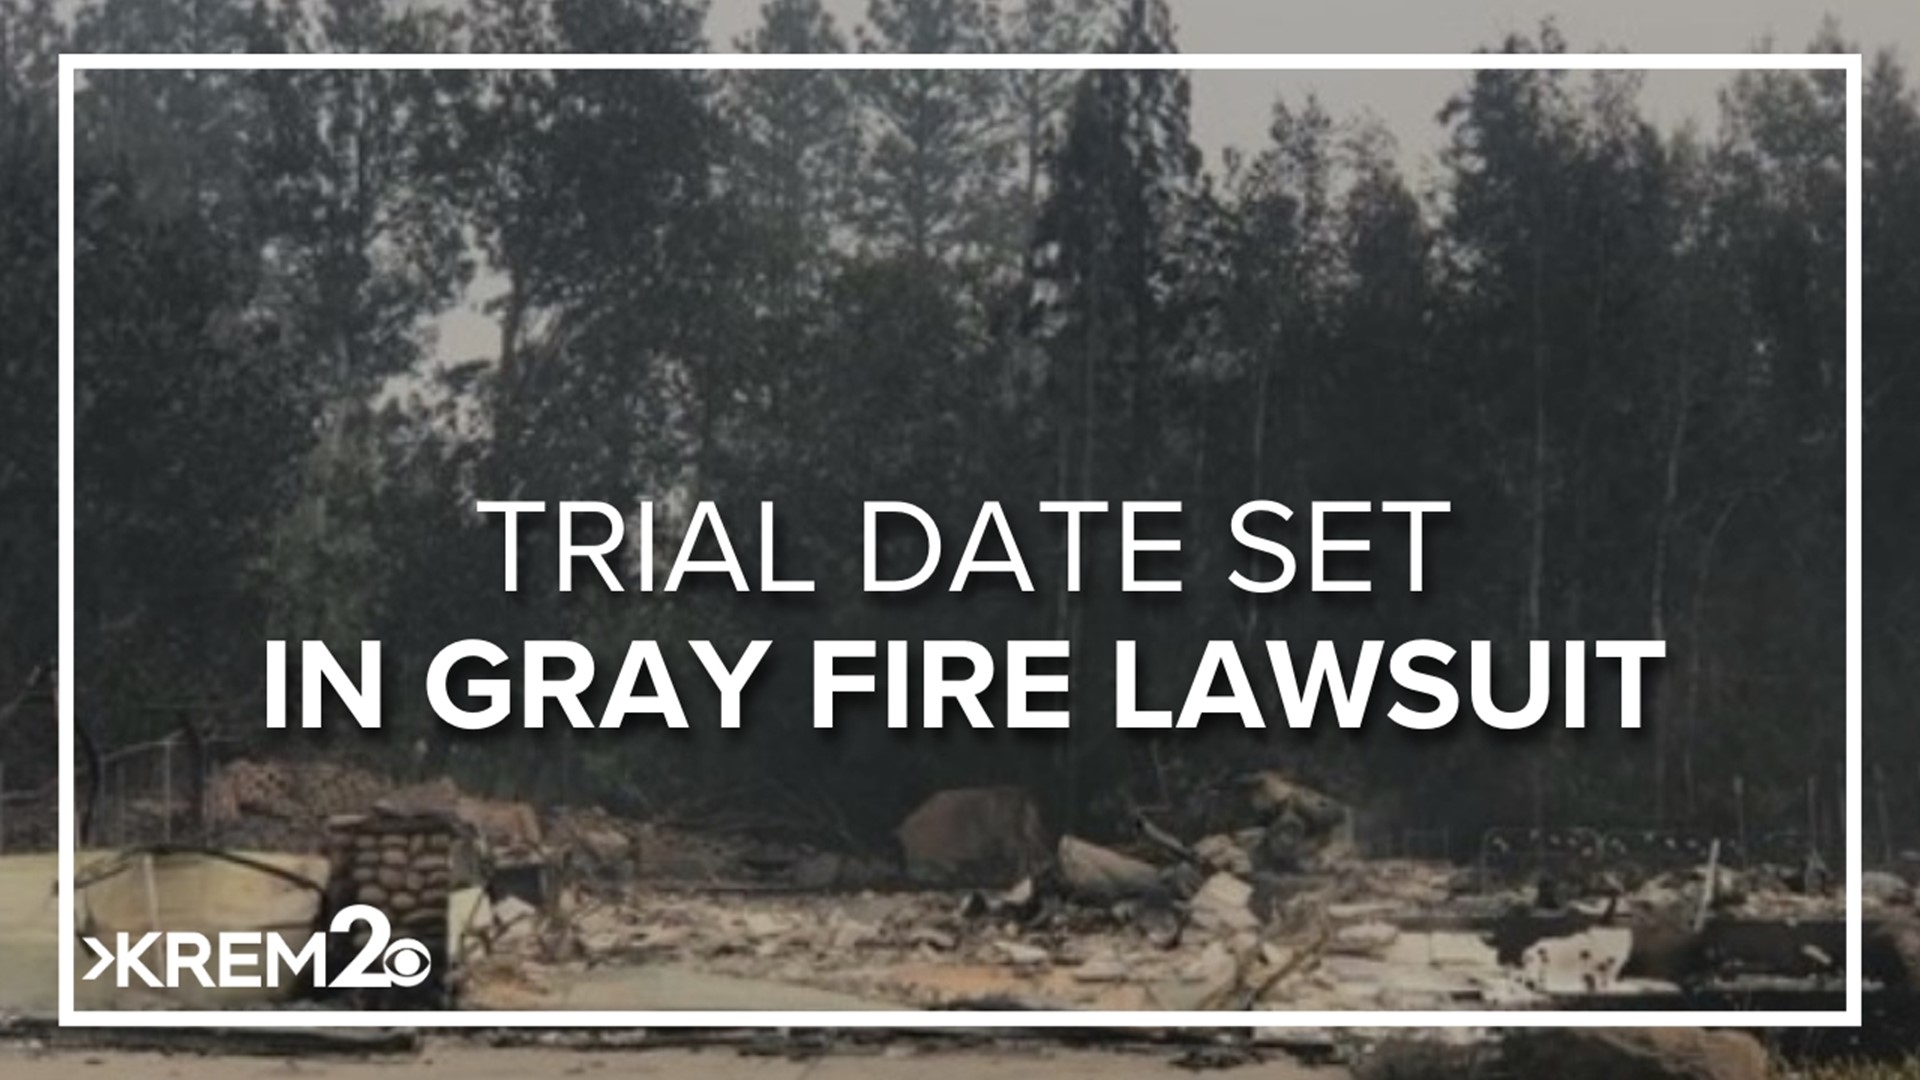 Singleton Schreiber is a law firm that specializes in wildfire litigation. The firm got involved with the Gray Fire back in September.